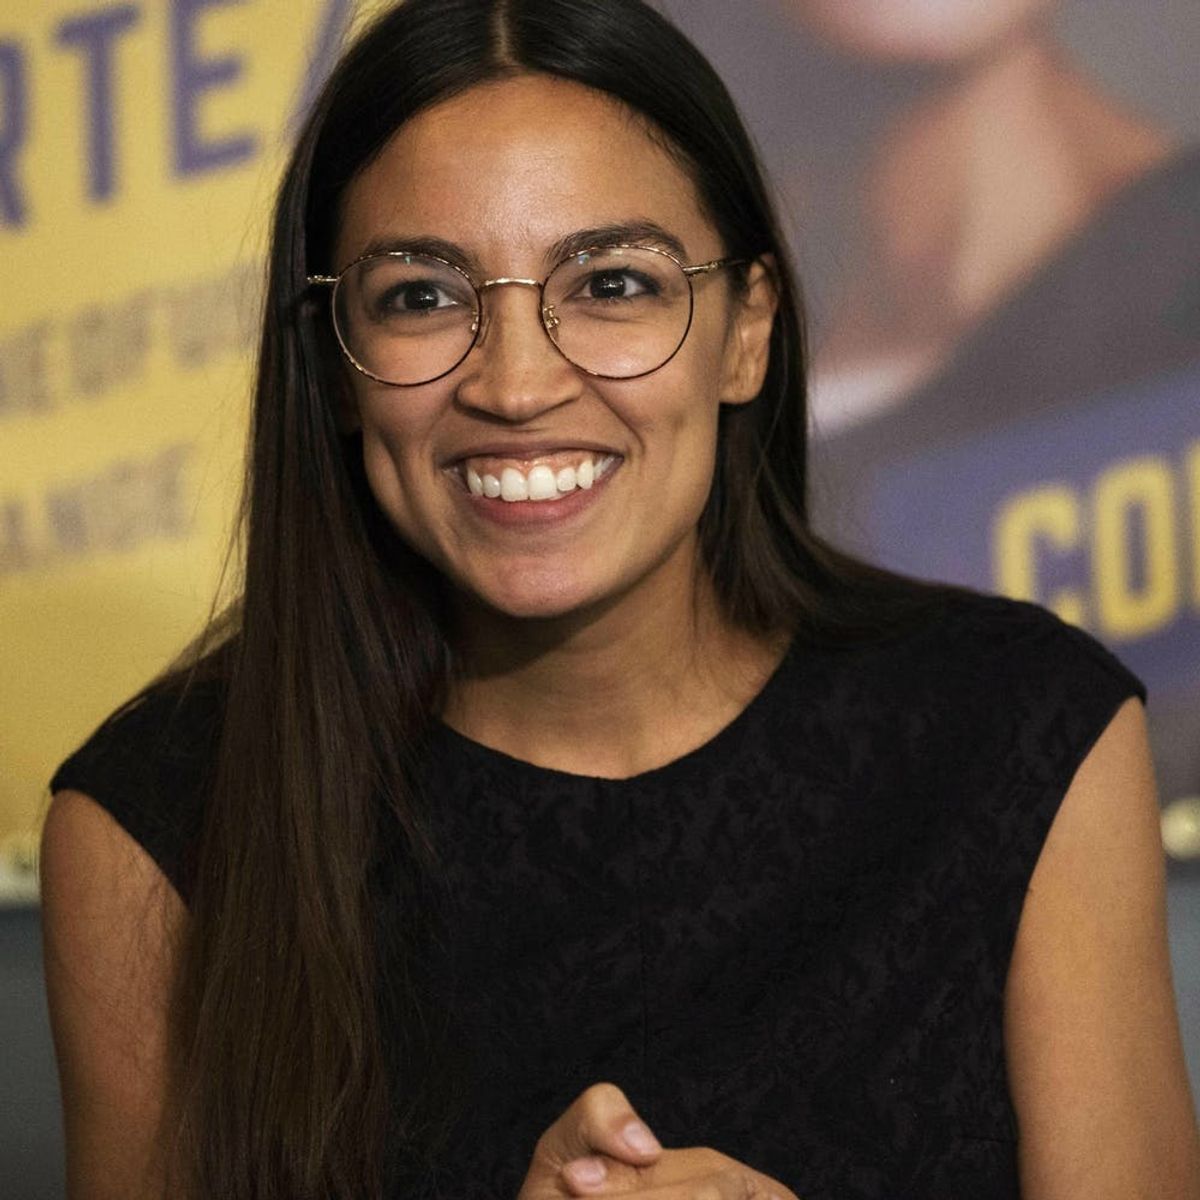 Alexandria Ocasio-Cortez Just Broke Down What Self-Care Actually Means for Women